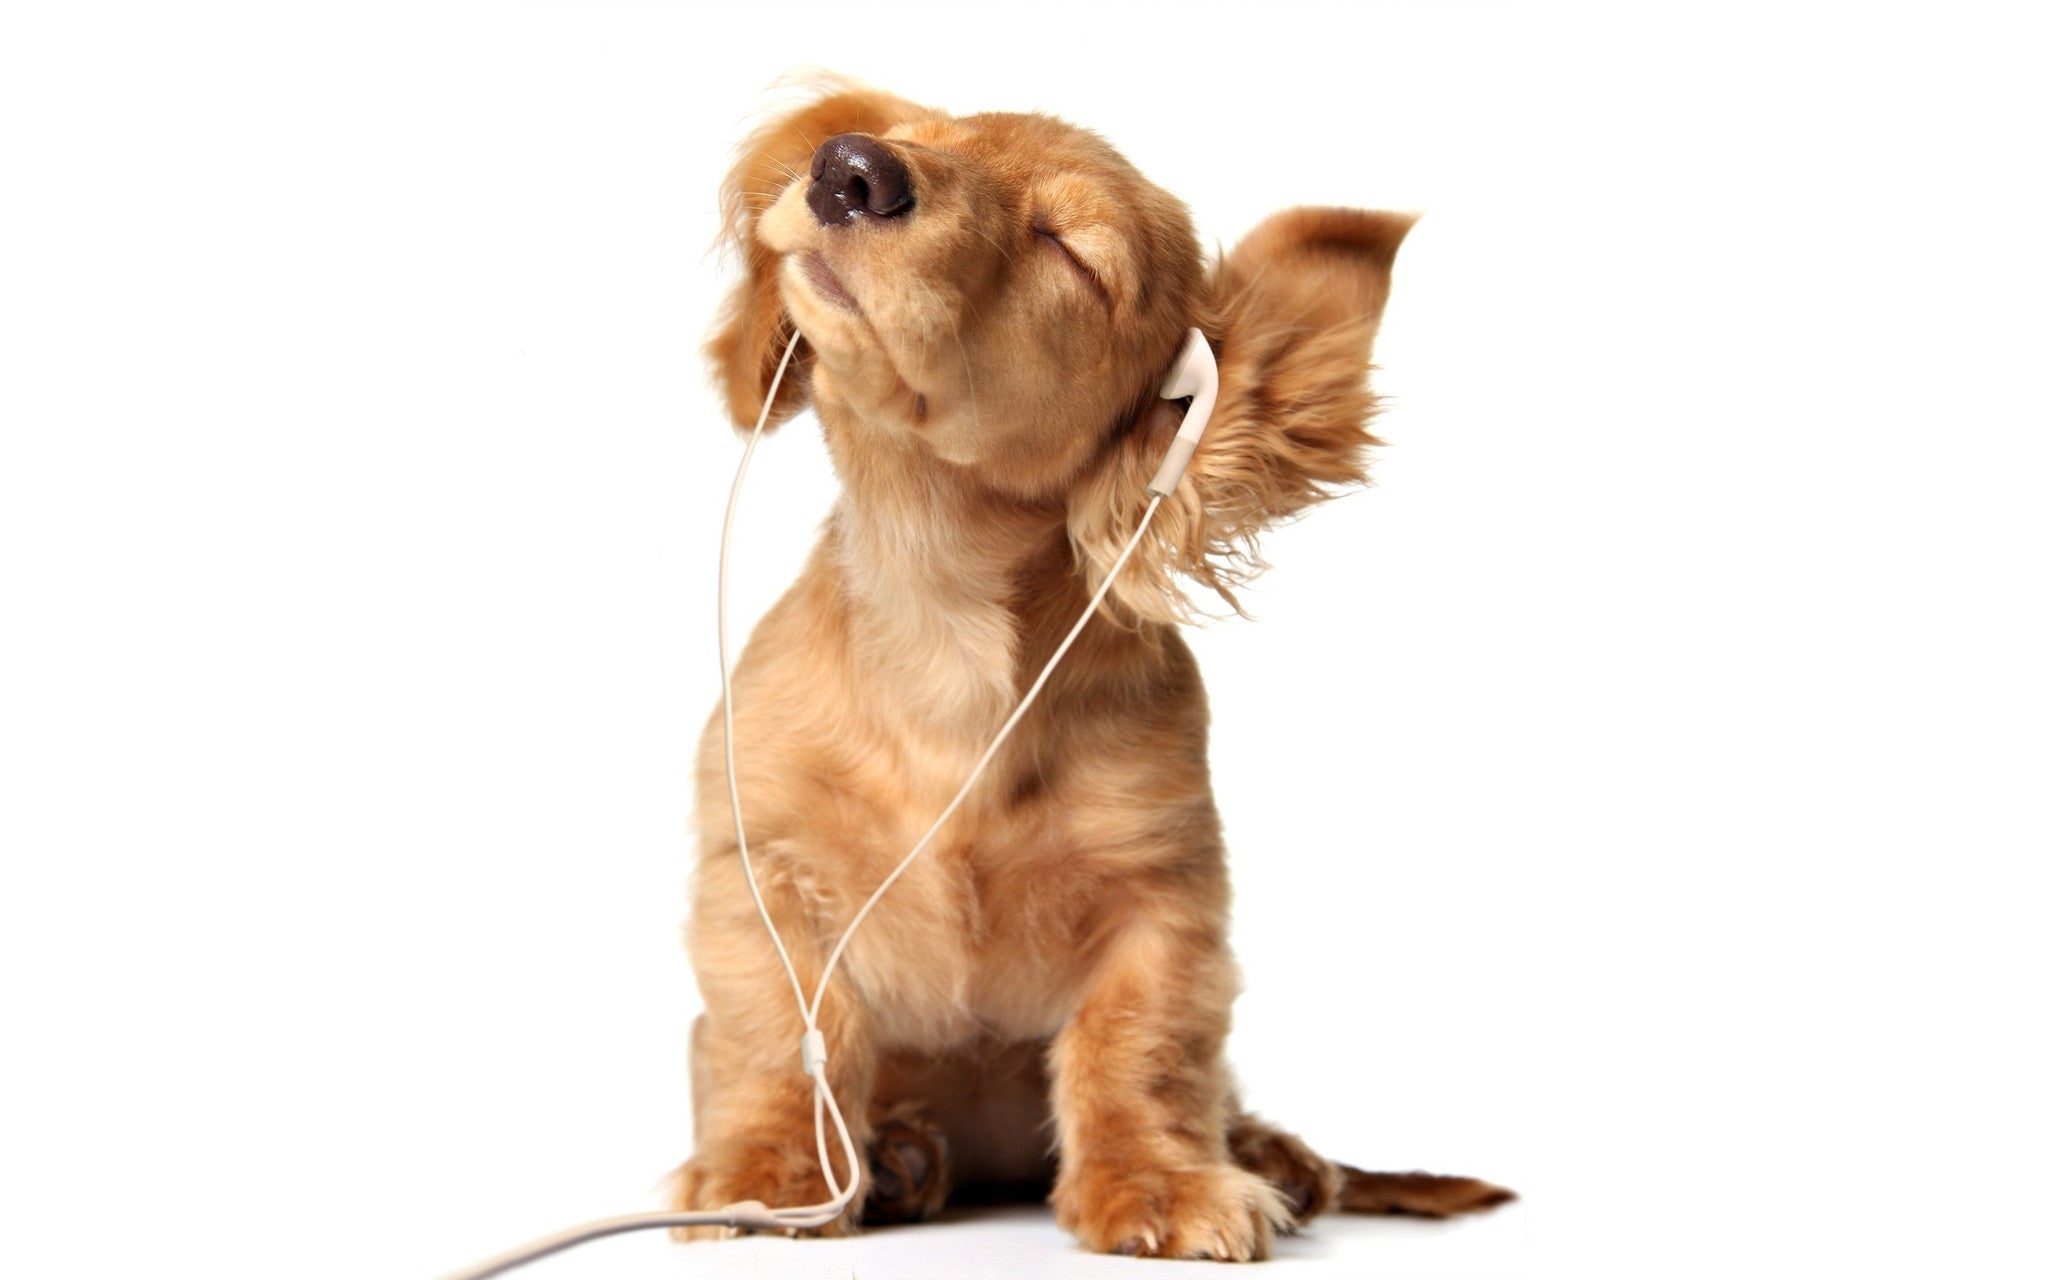 Can anti-anxiety music help your dog de-stress?